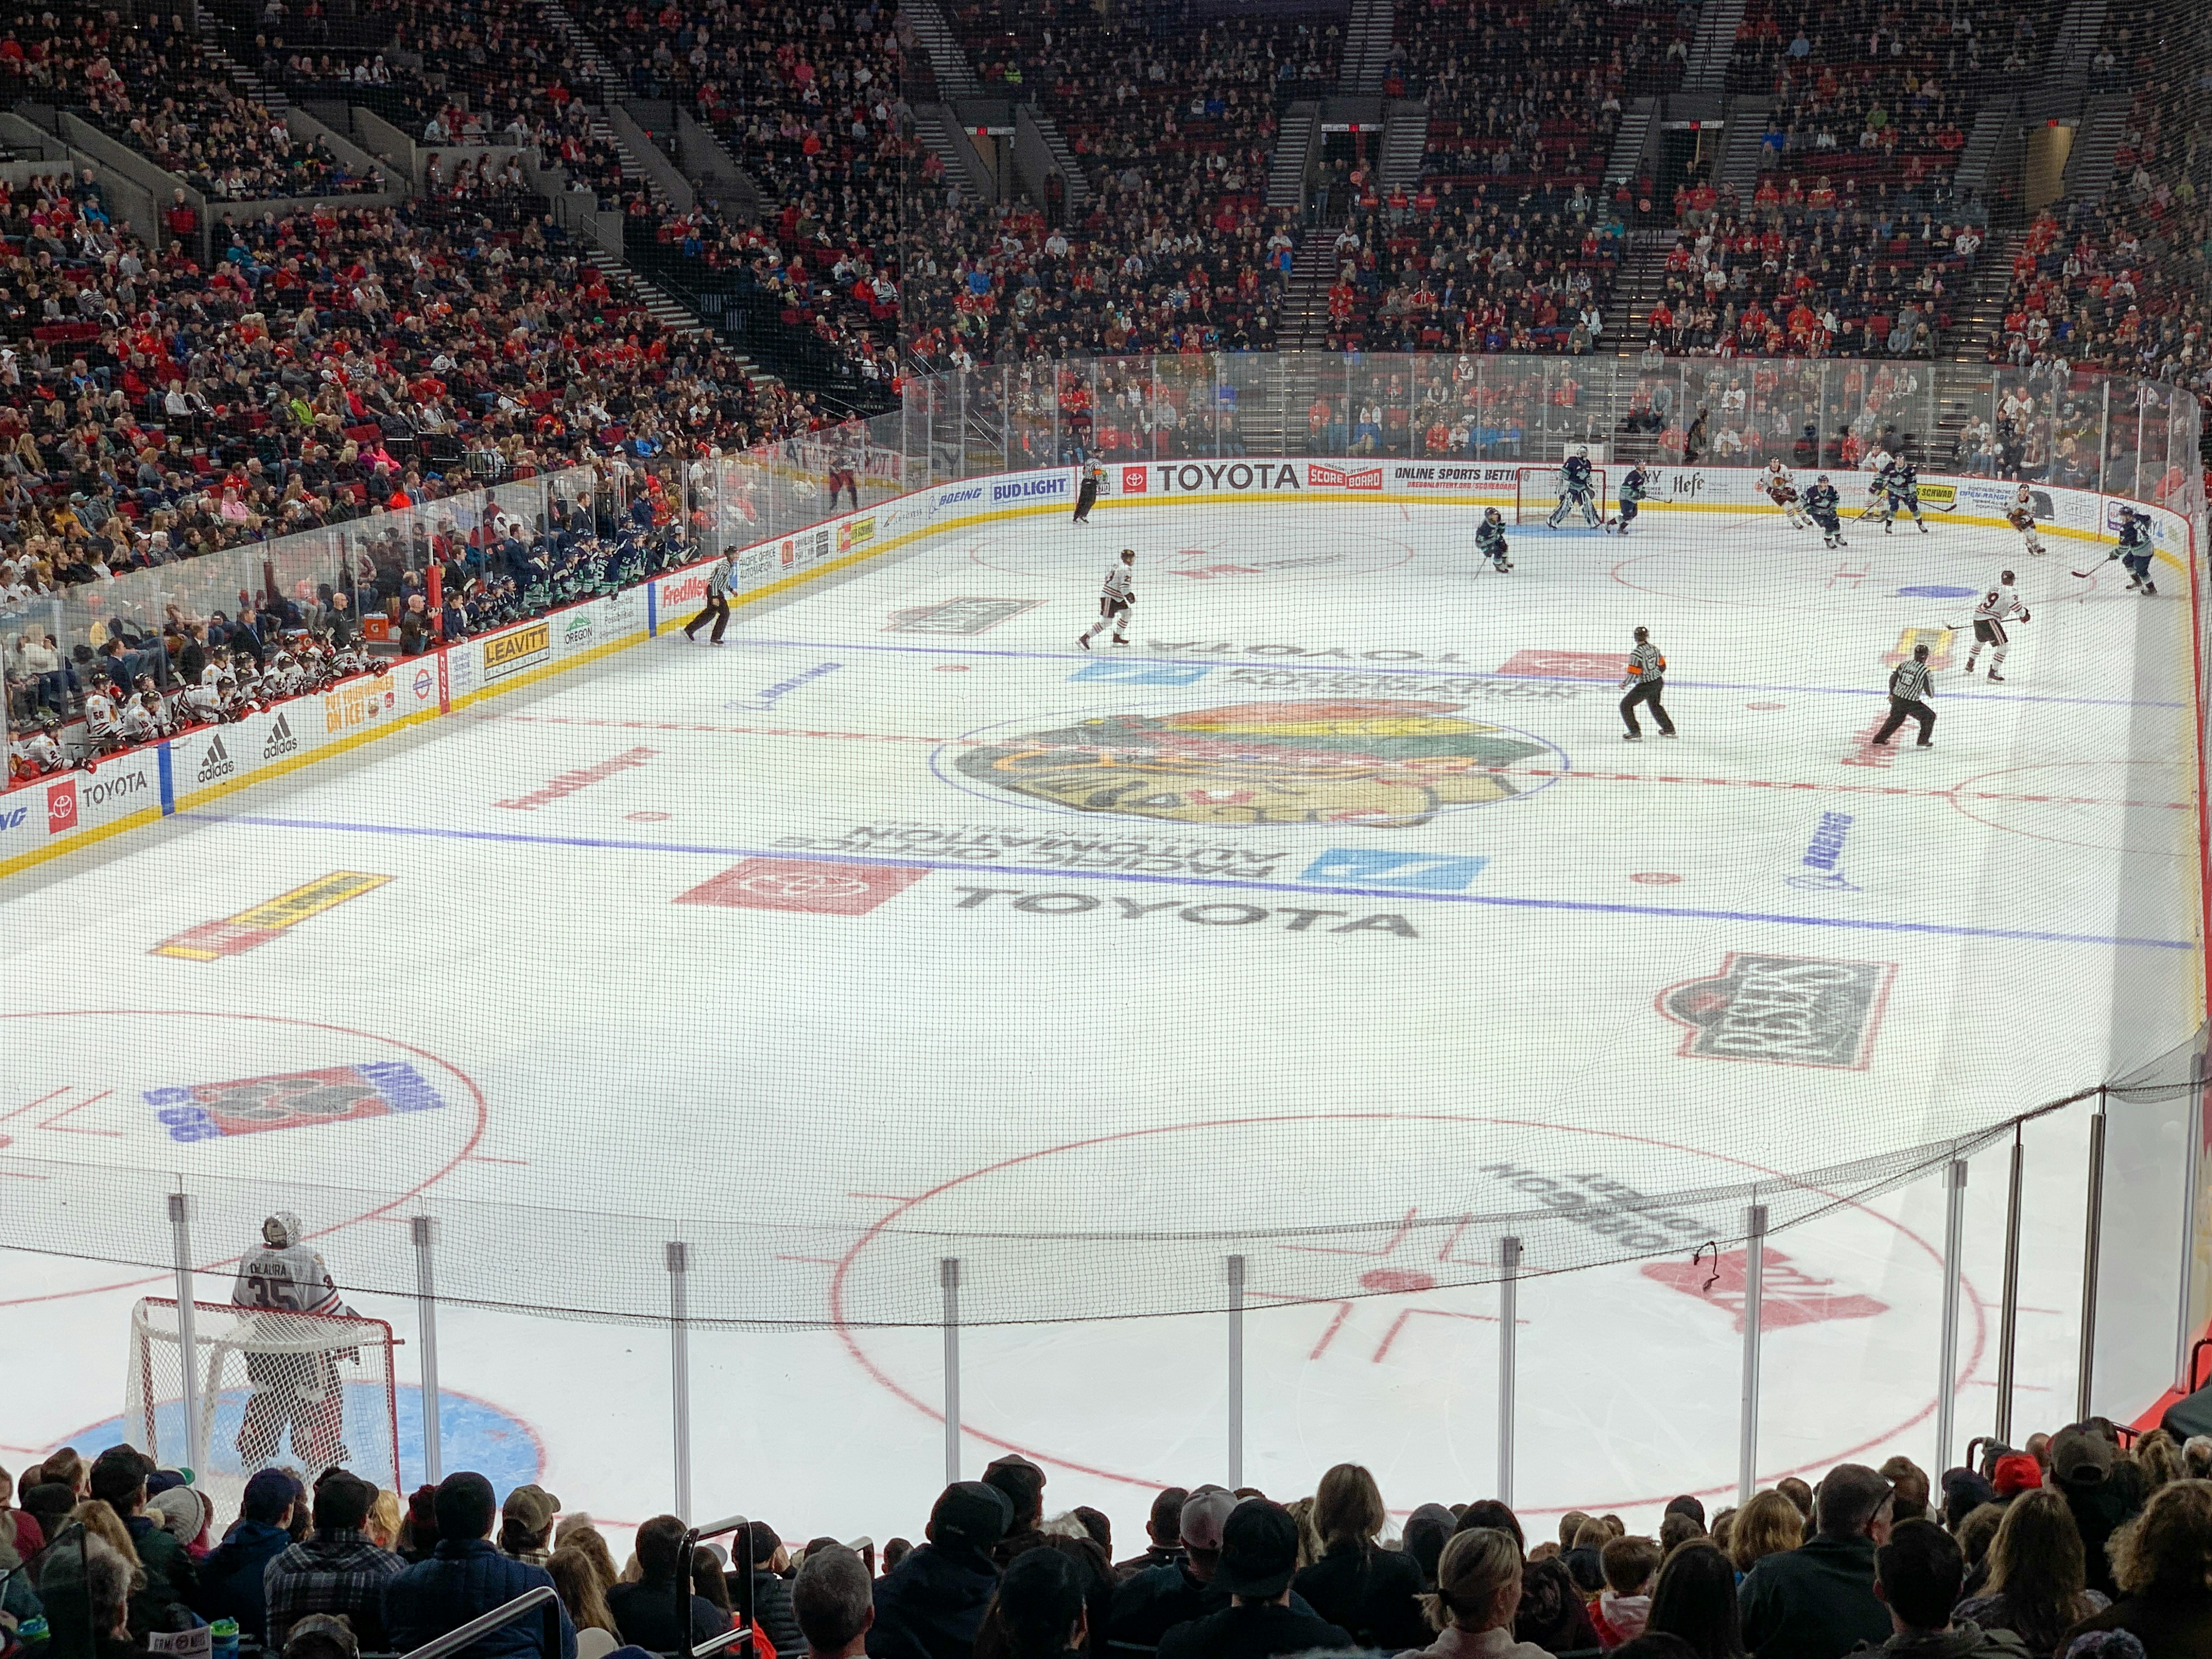 The Portland Winterhawks of the Western Hockey League, play their traditional New Years Eve game at the Moda Center.